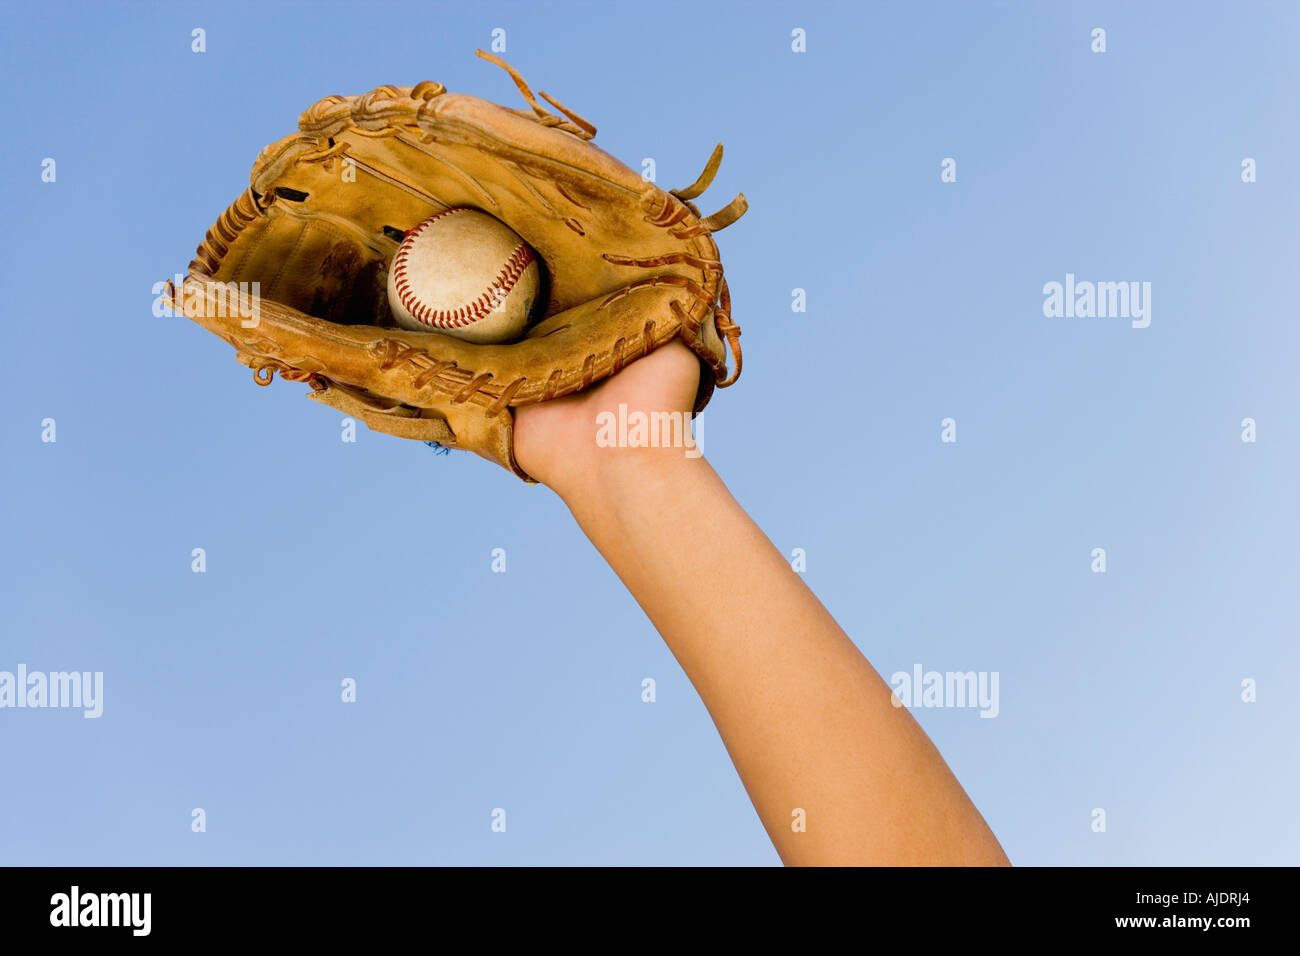 Baseball player catching ball in baseball glove, close-up of hand in Stock  Photo - Alamy